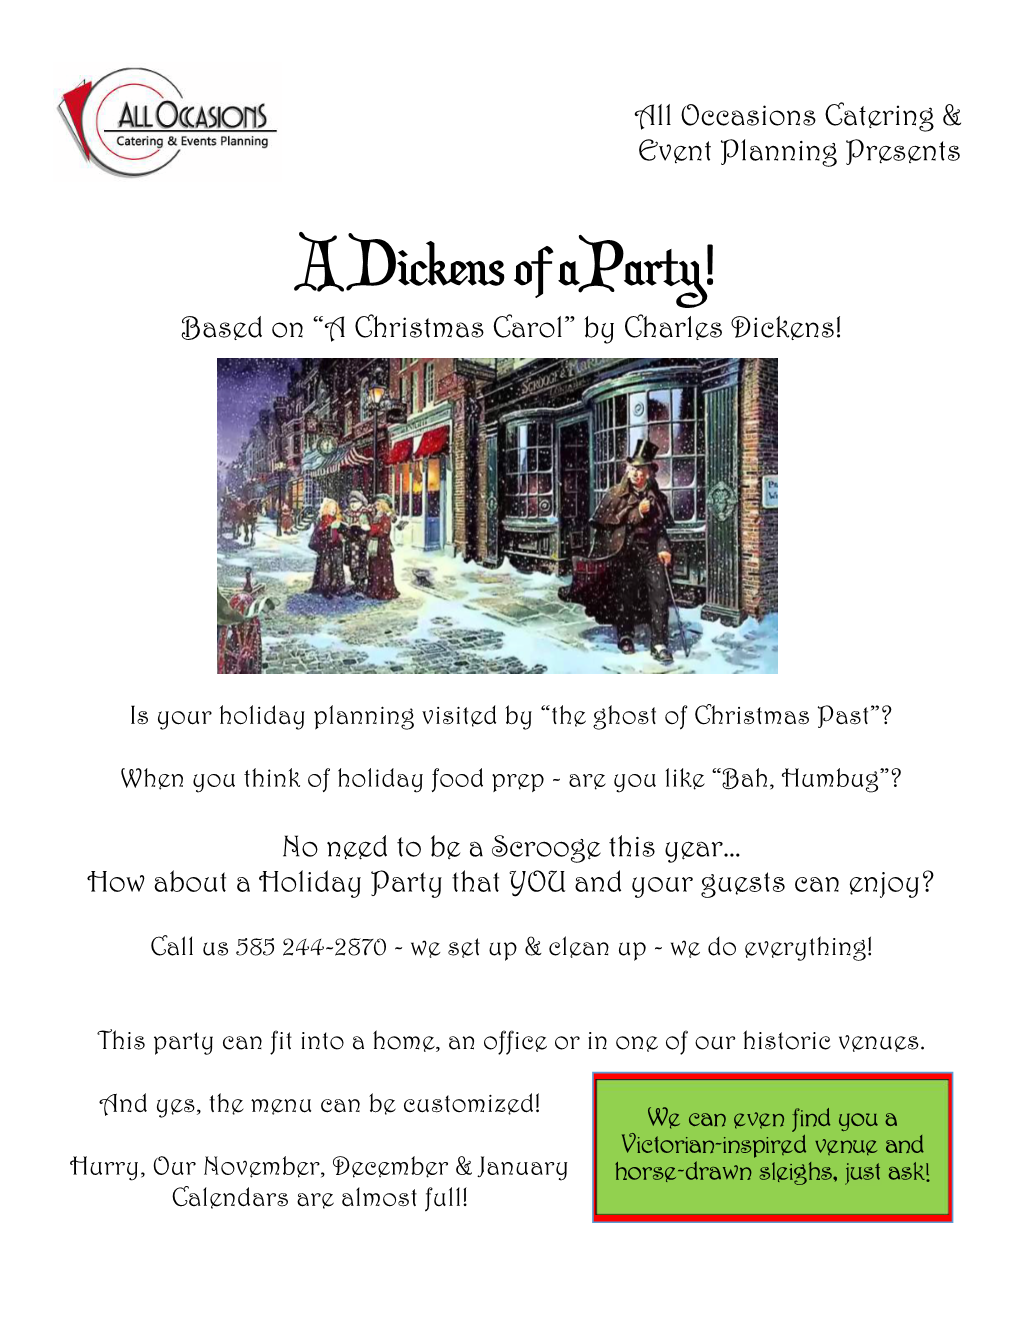 A Dickens of a Party! Based on “A Christmas Carol” by Charles Dickens!